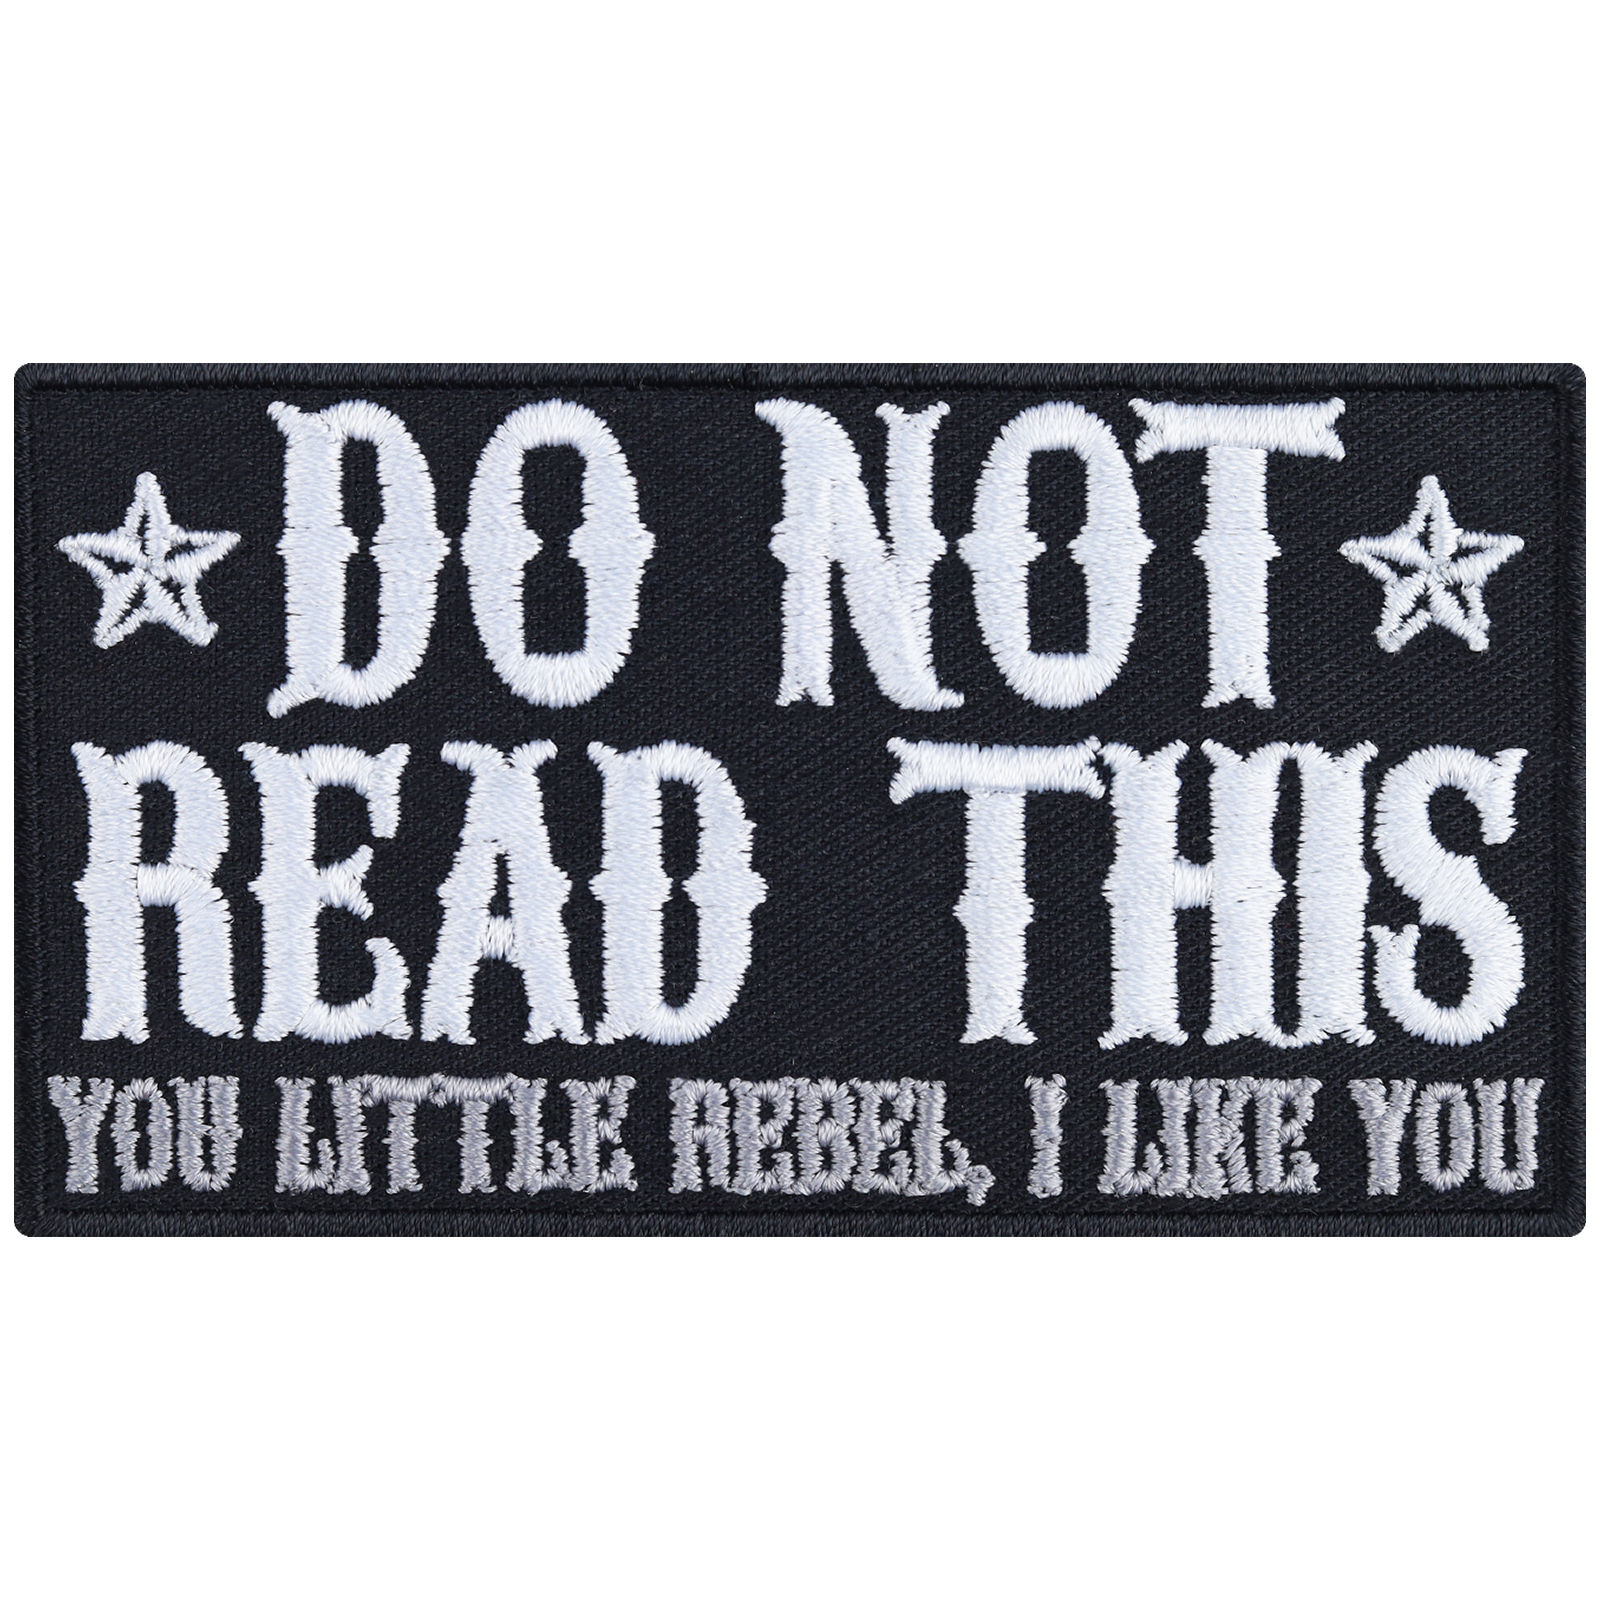 Do not read this. (You little rebel, I like you) - Patch